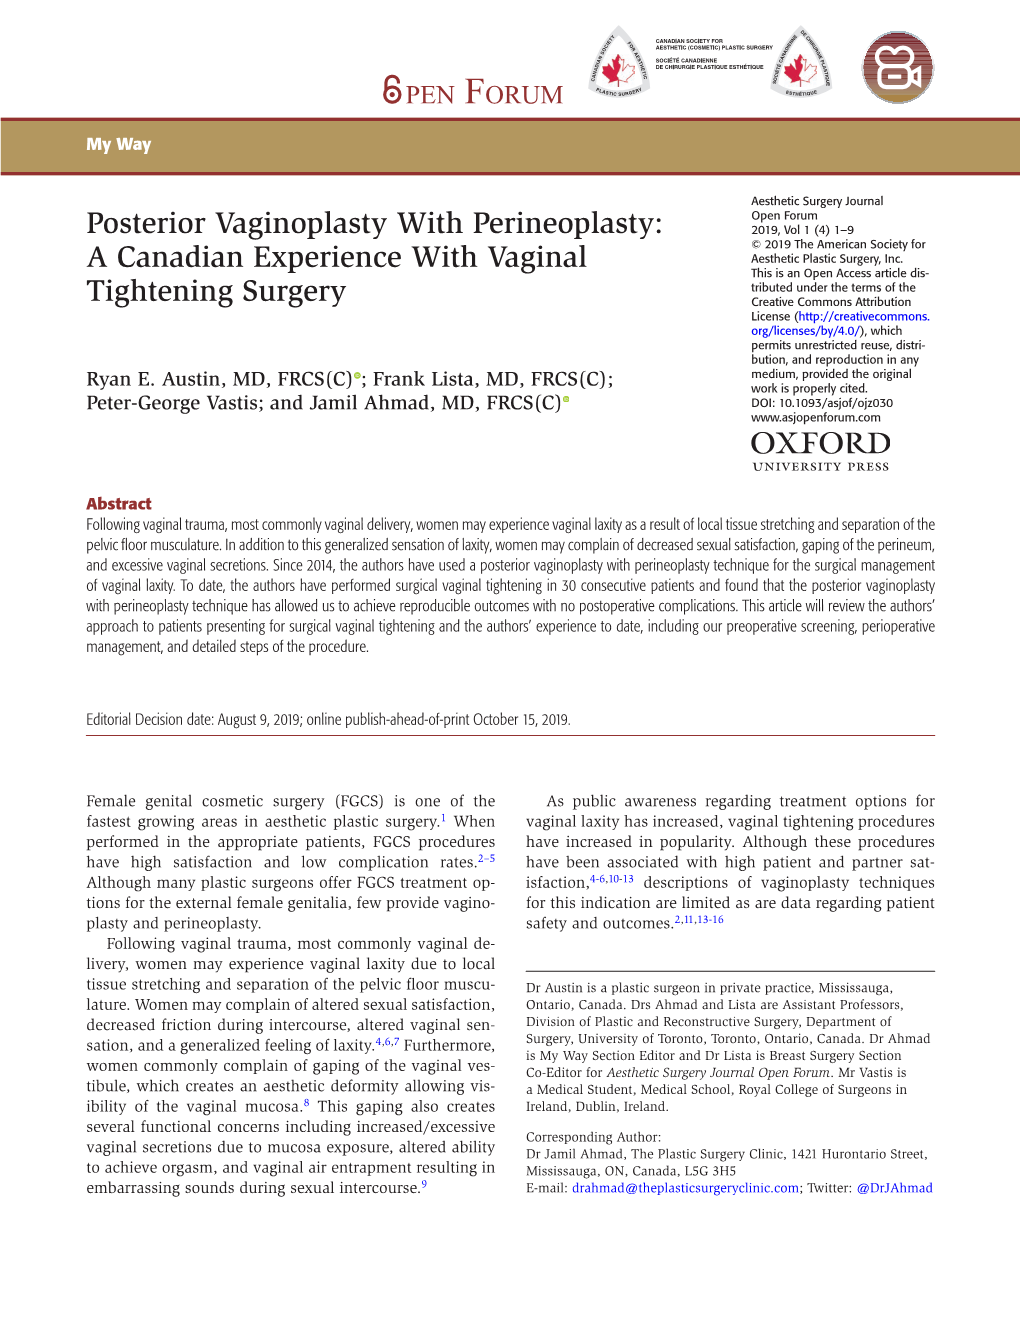 Posterior Vaginoplasty with Perineoplasty: a Canadian